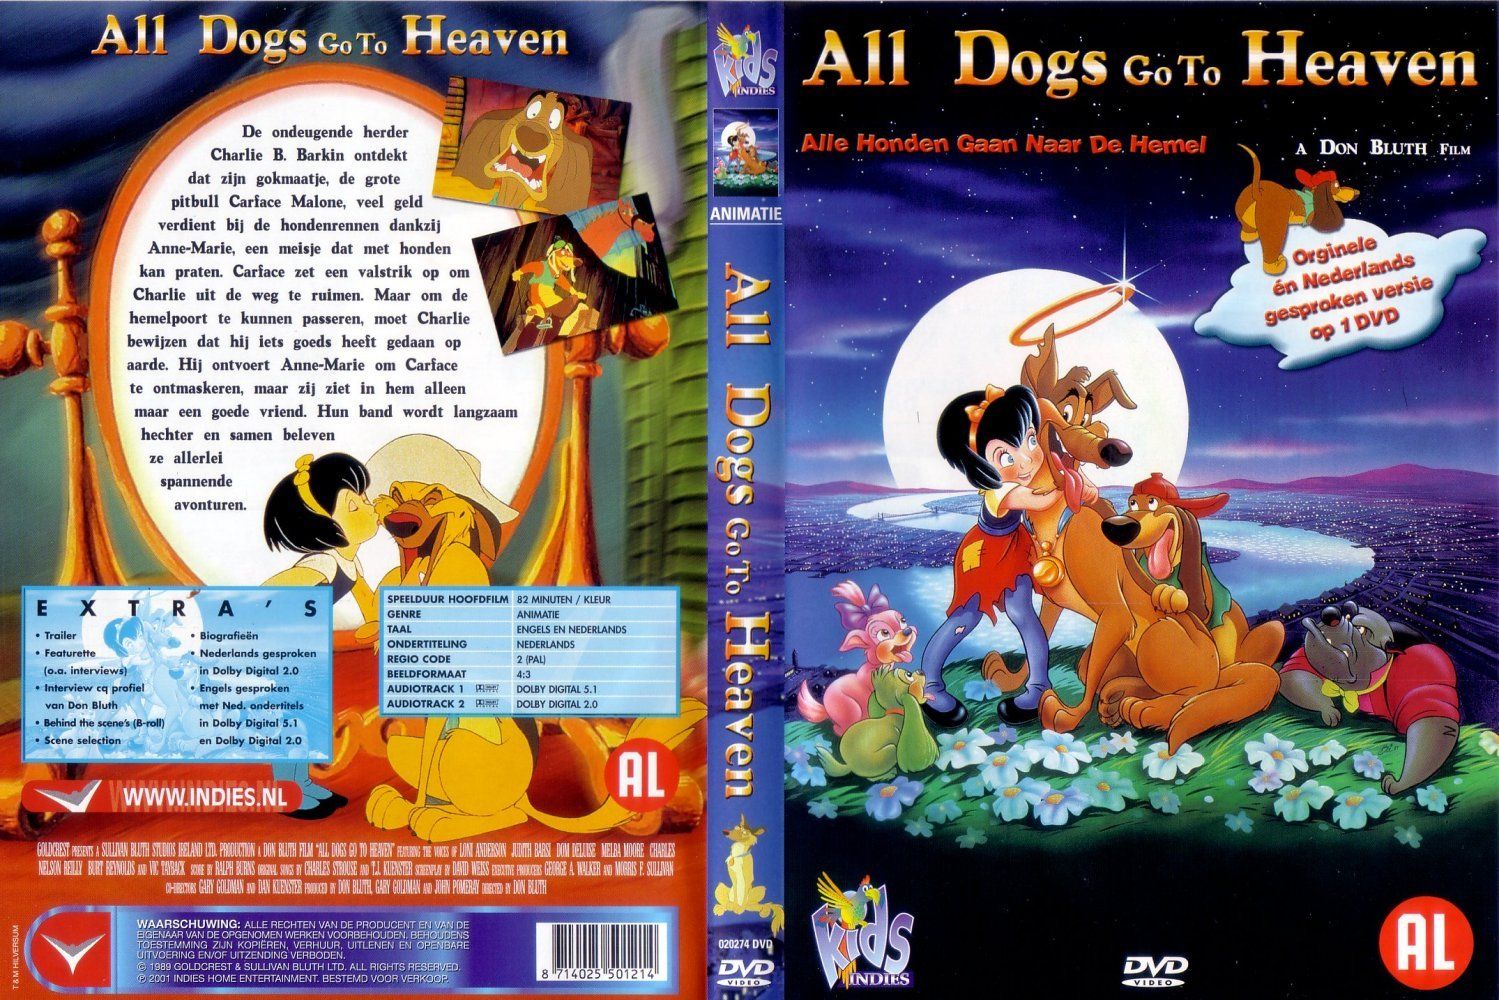 All Dogs Go To Heaven Dvd Nl Dvd Covers Cover Century Over 500 000 Album Art Covers For Free